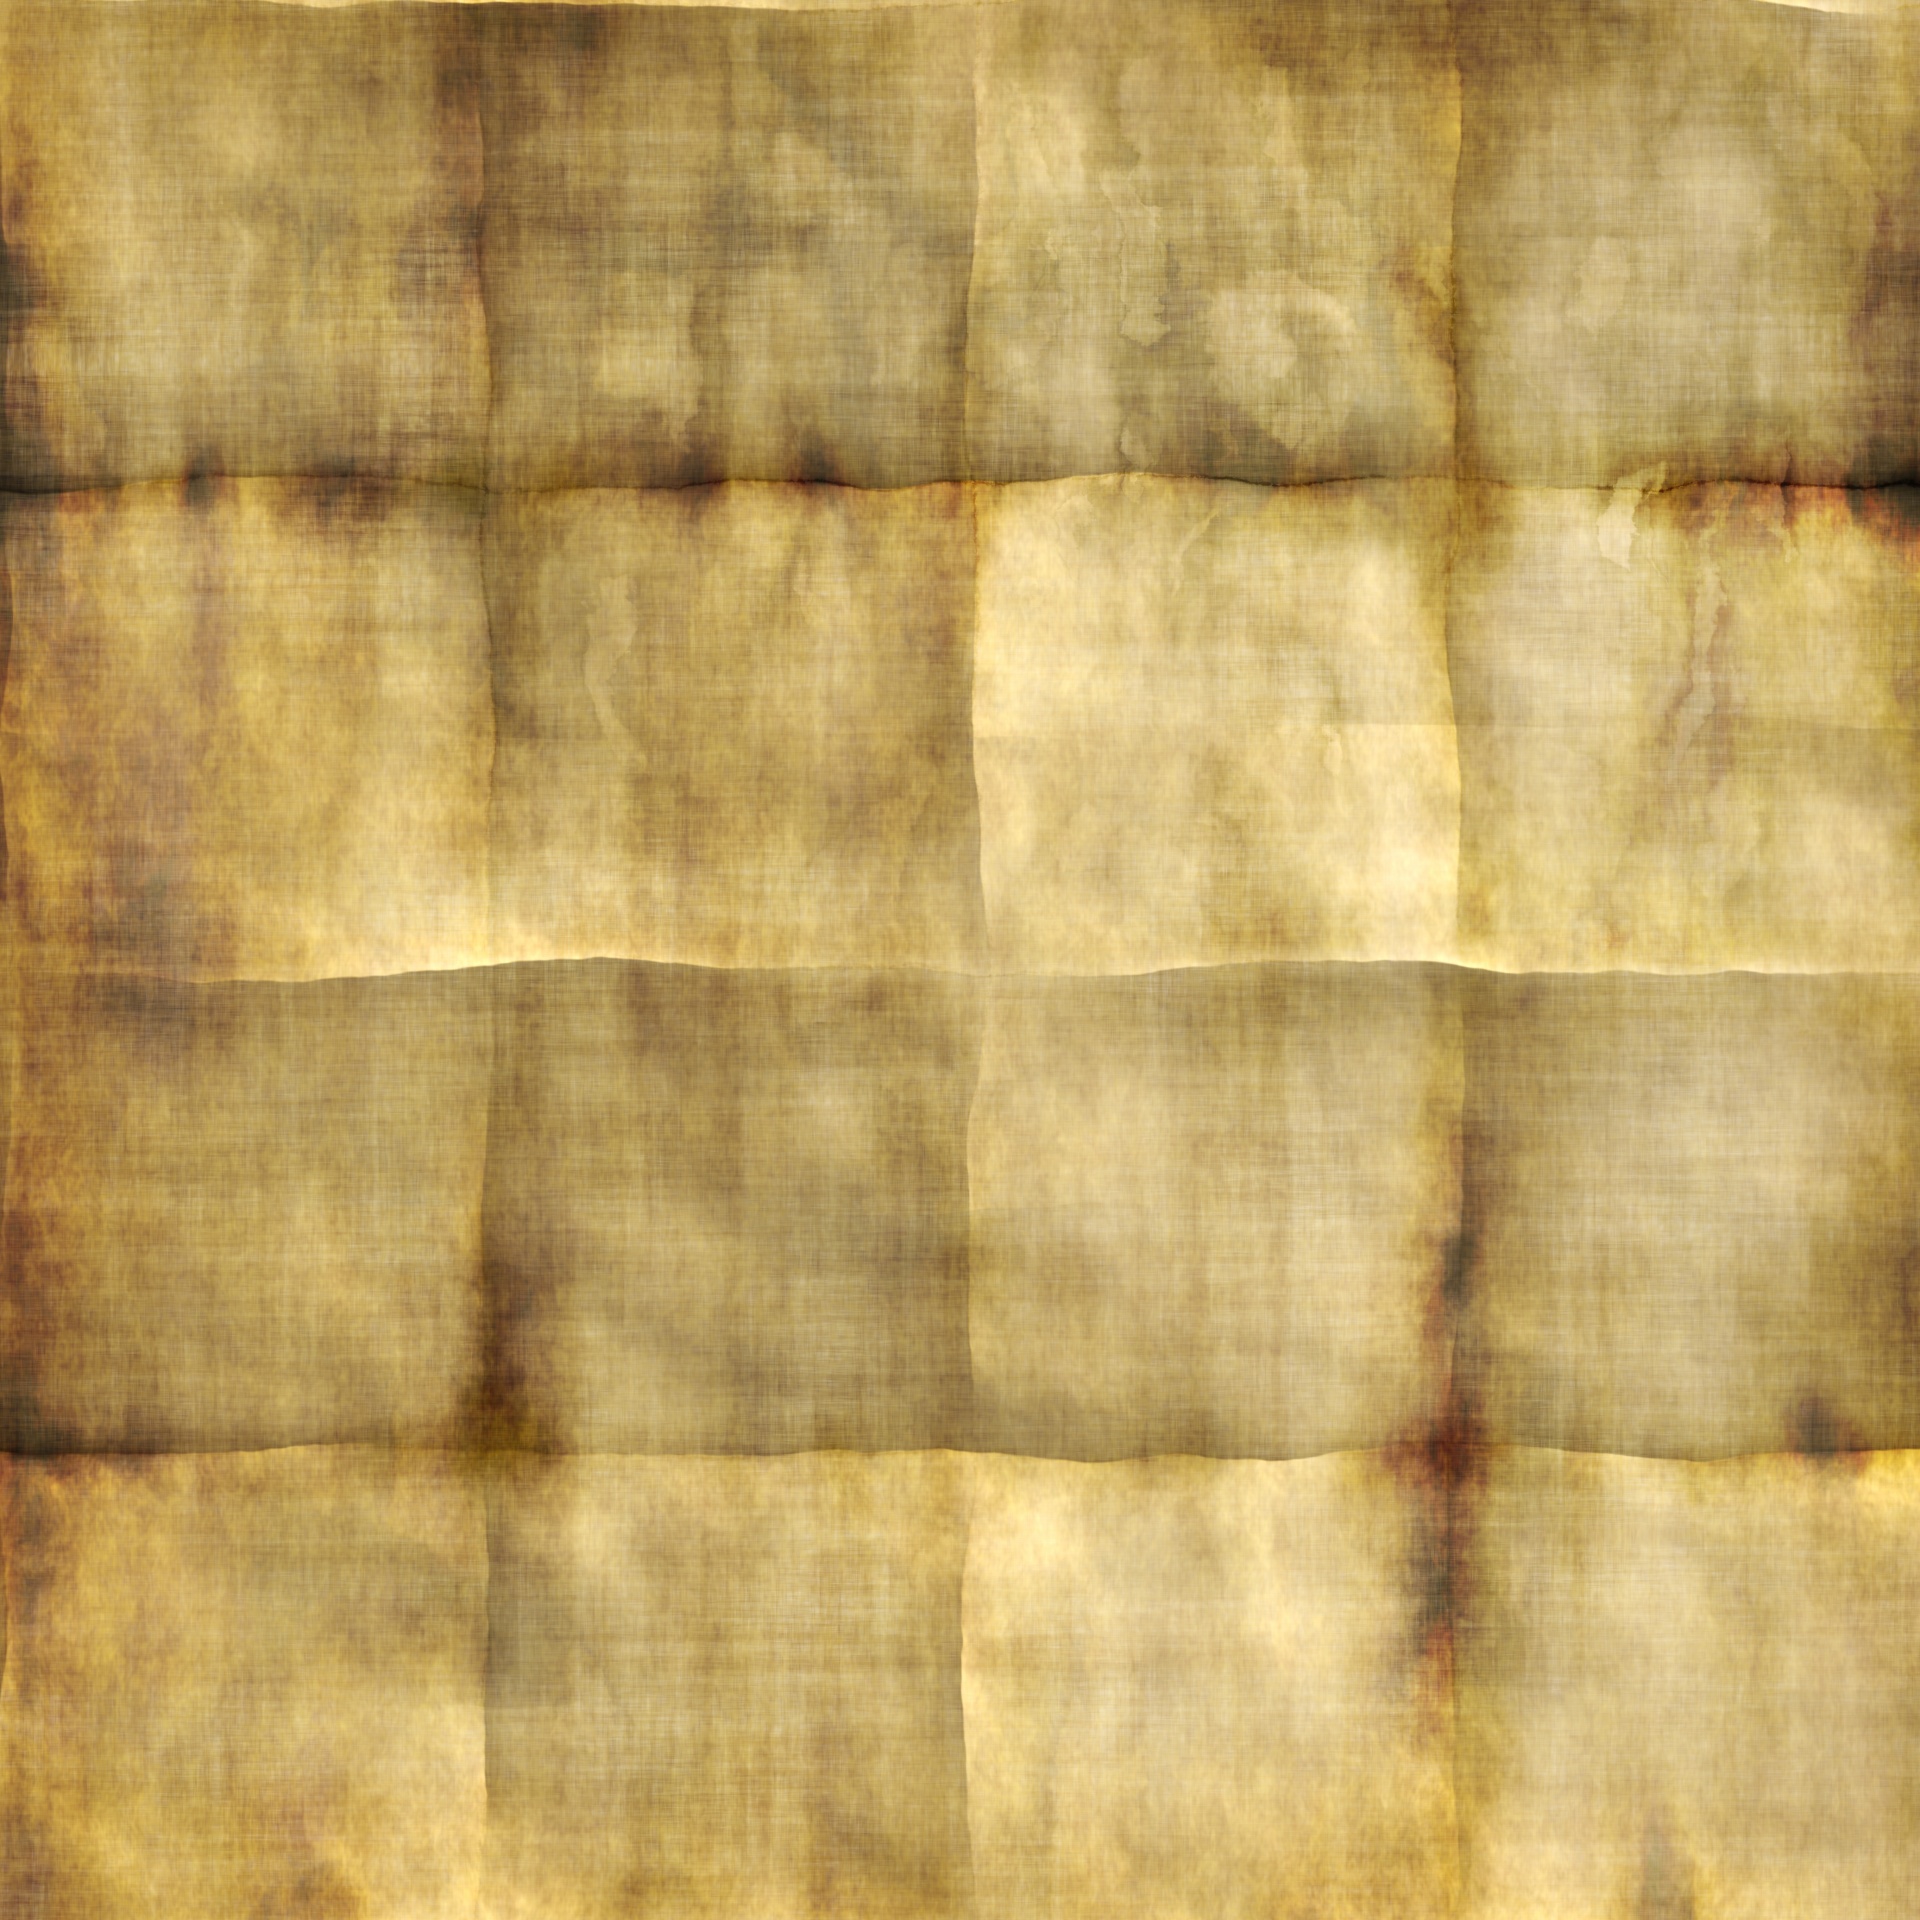 Weathered And Creased Antique Paper Background Stock Photo